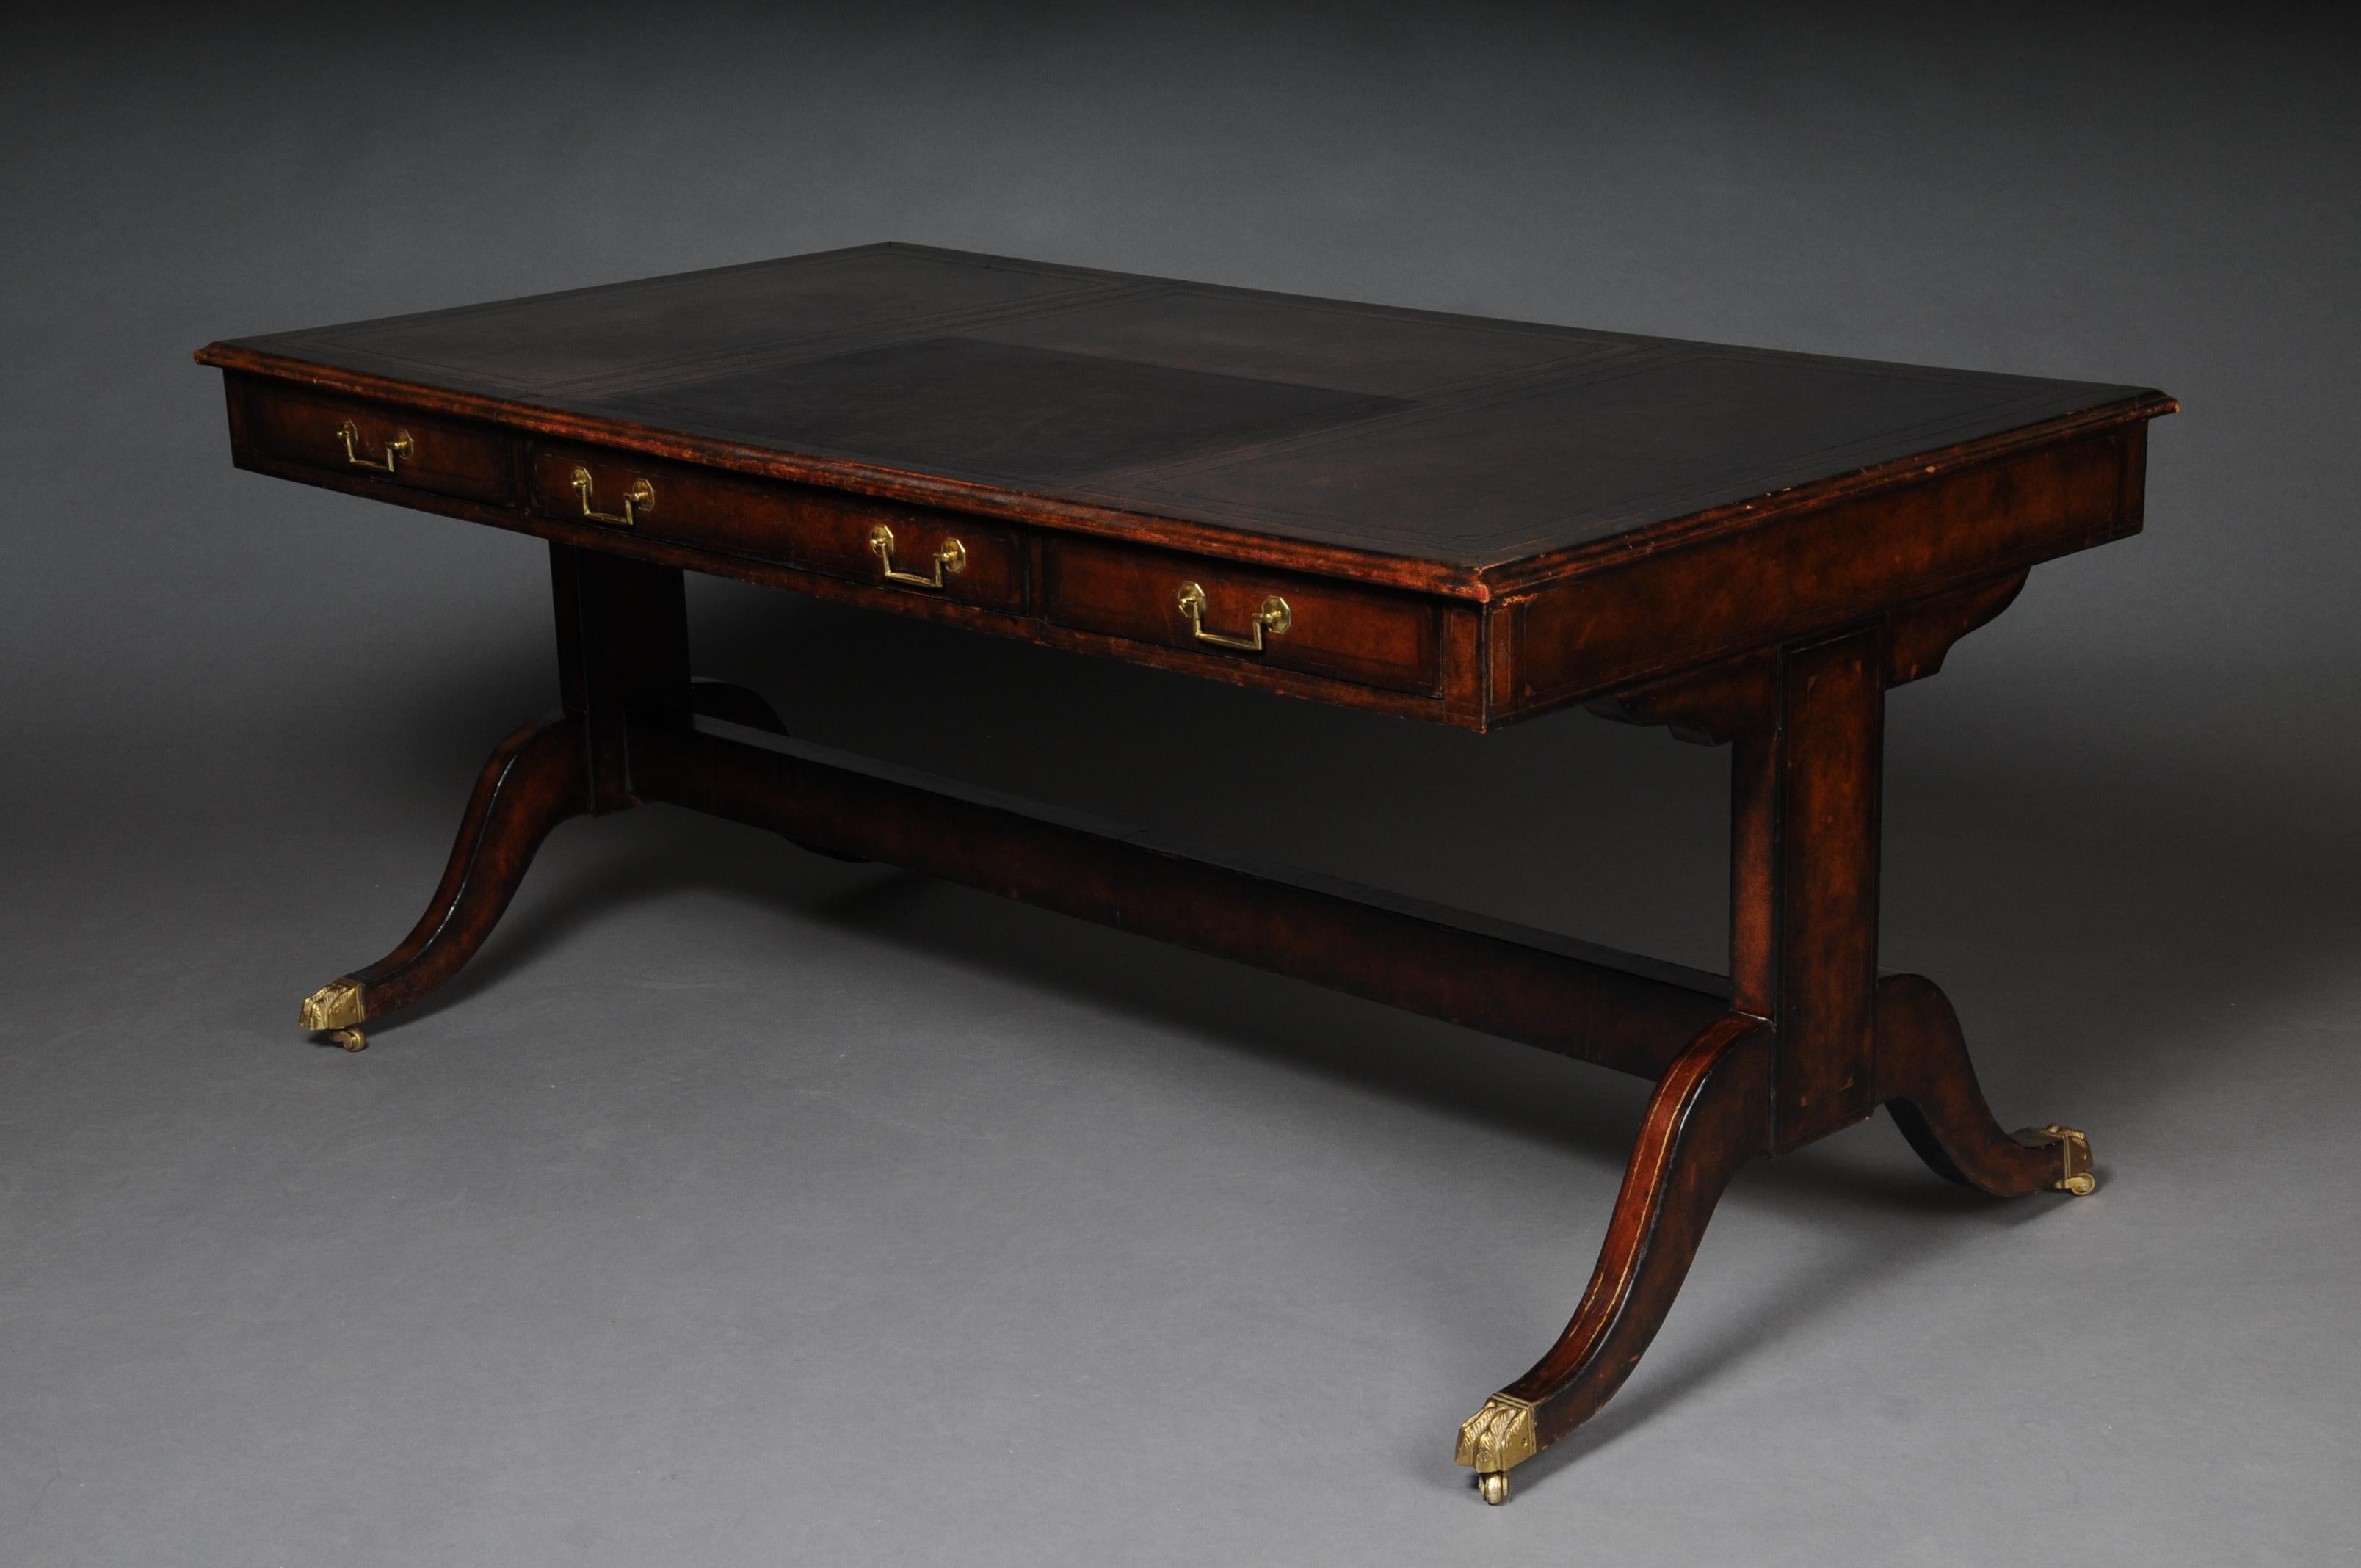 English Partner Desk, 1870 Writing Desk, Mahogany Completely Covered in Leather 4